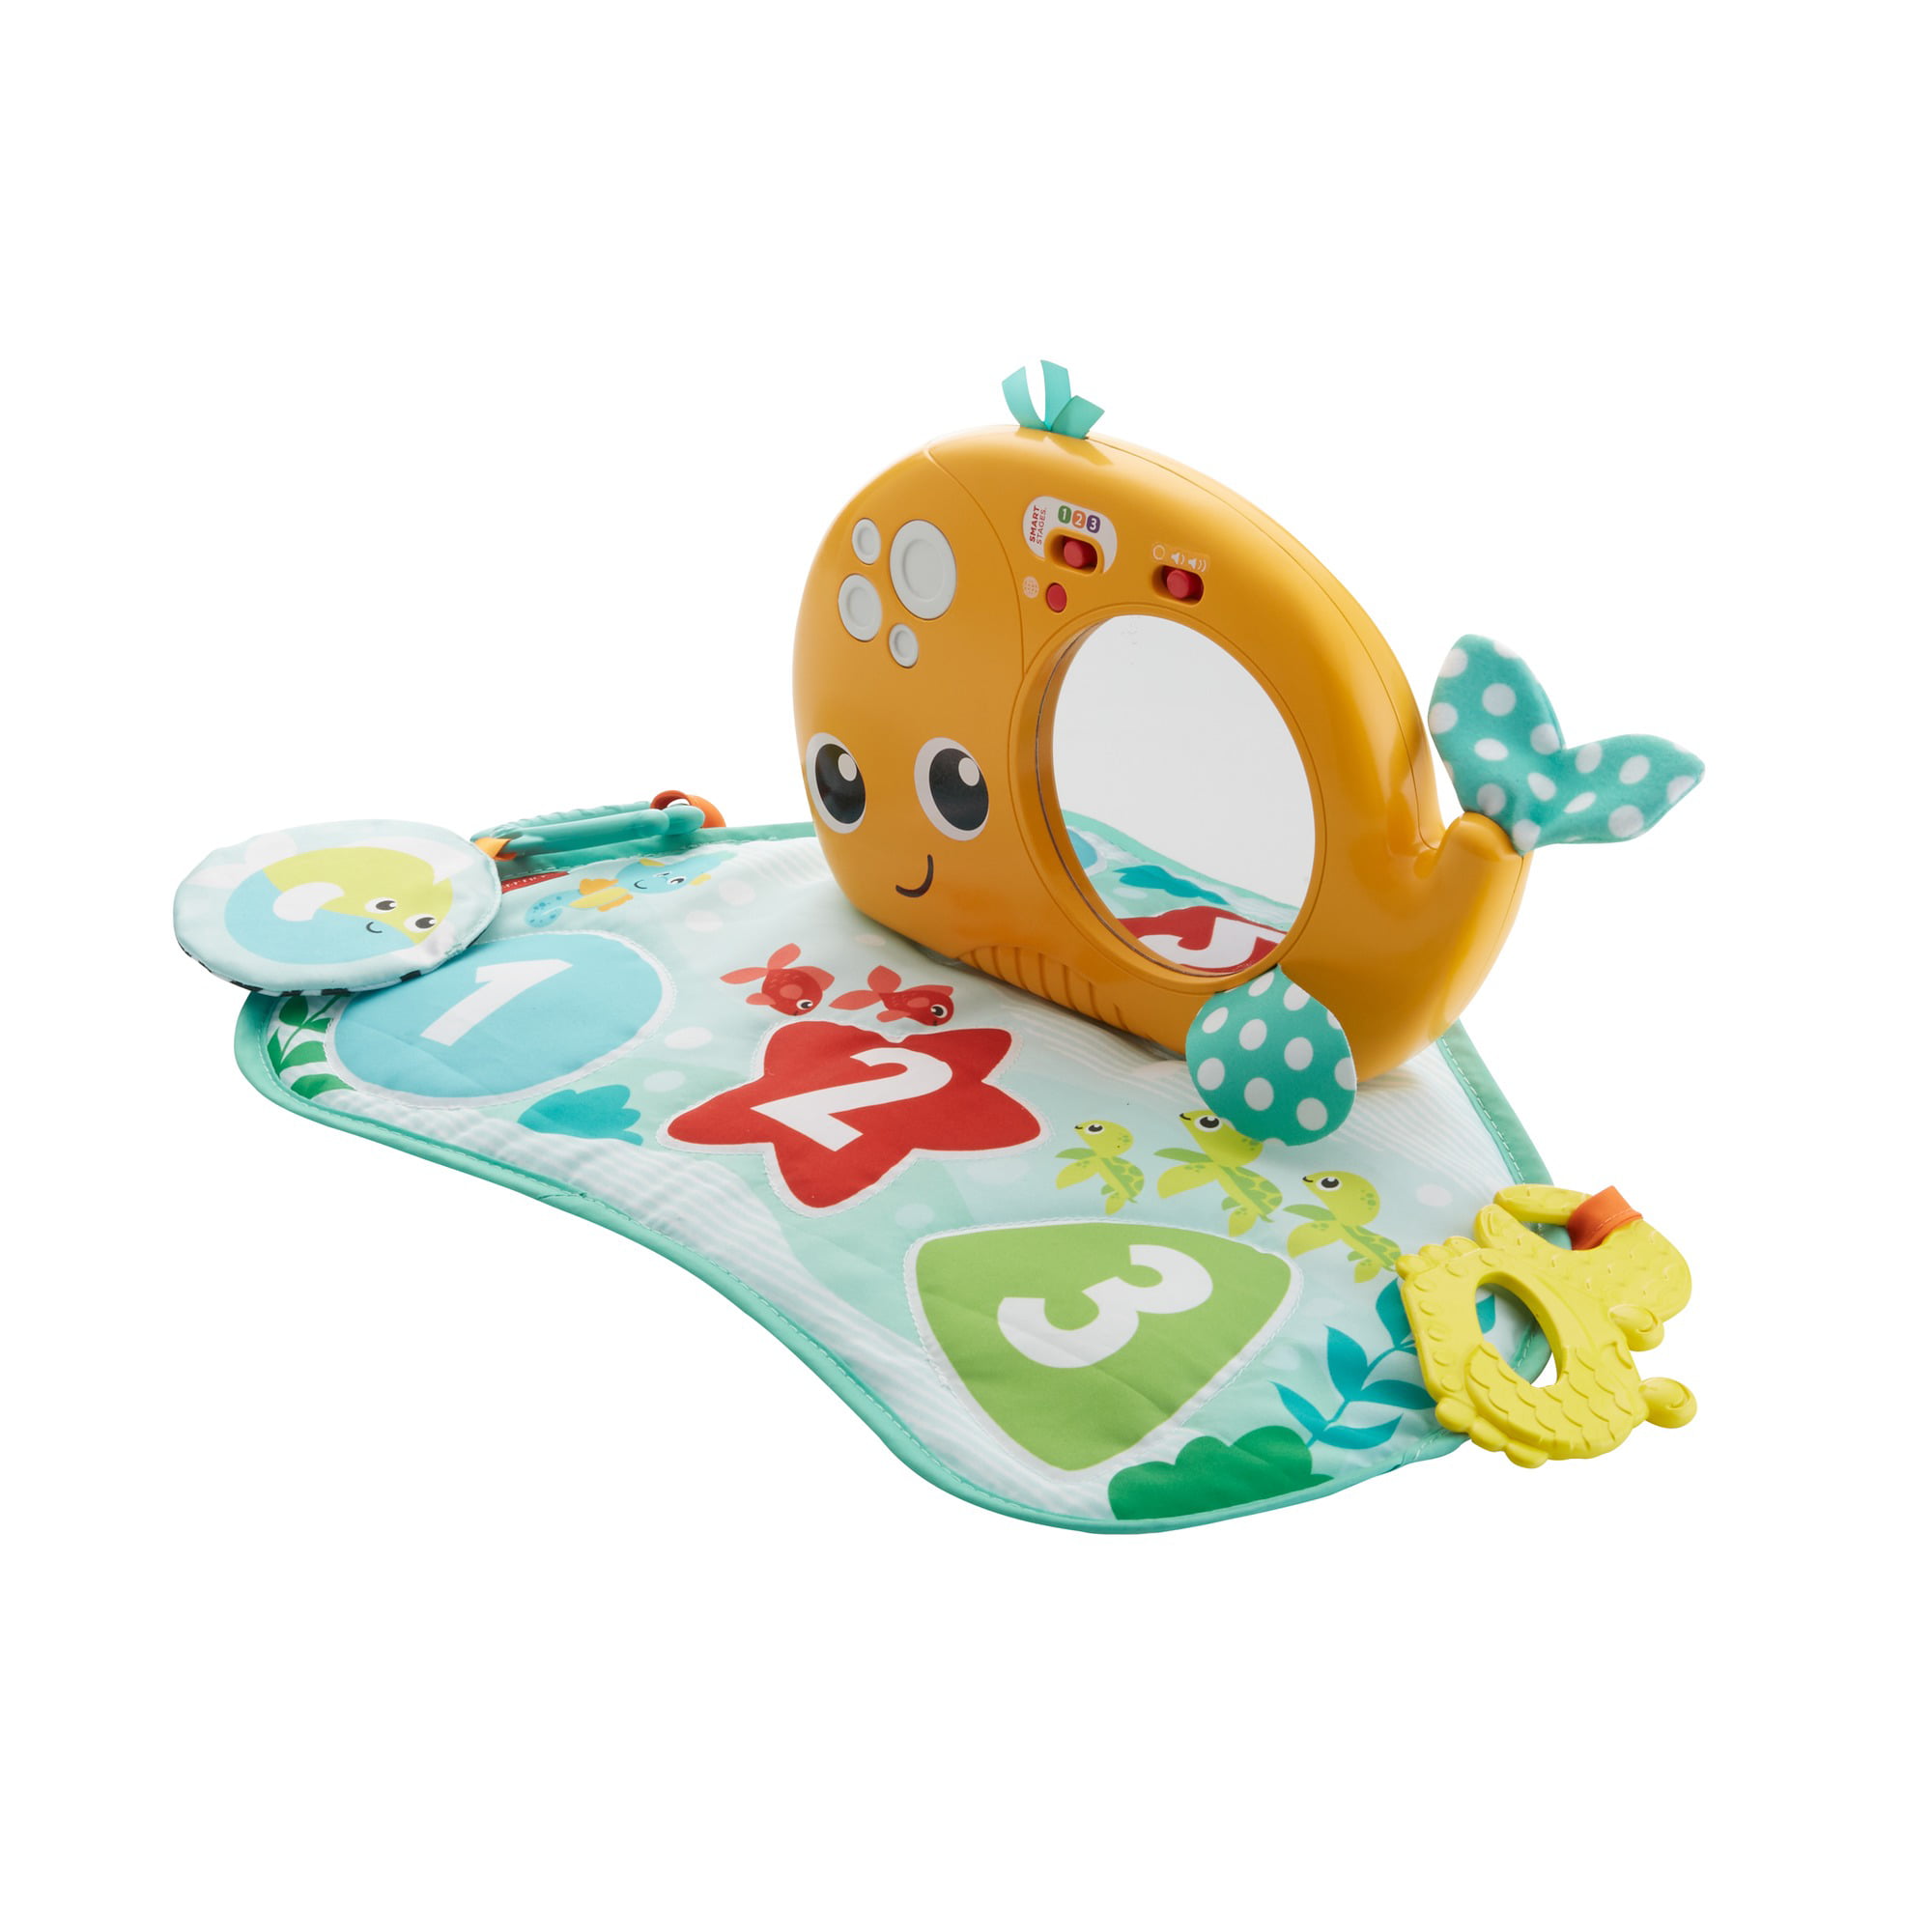 Fisher Price Press & Learn Activity Whale GGK35 